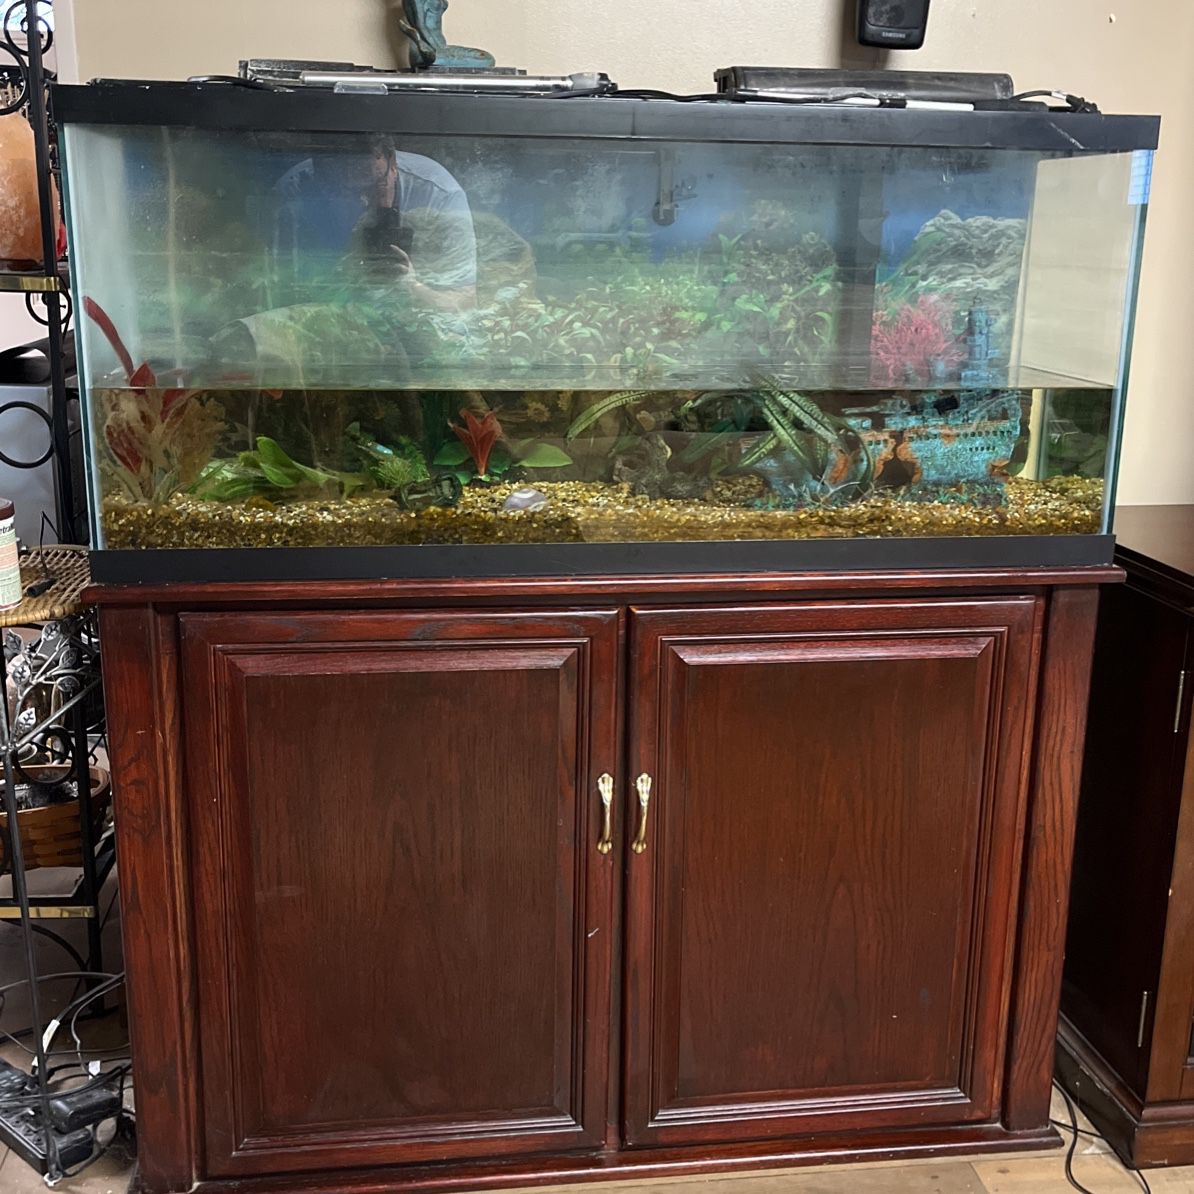 50 Gallons 